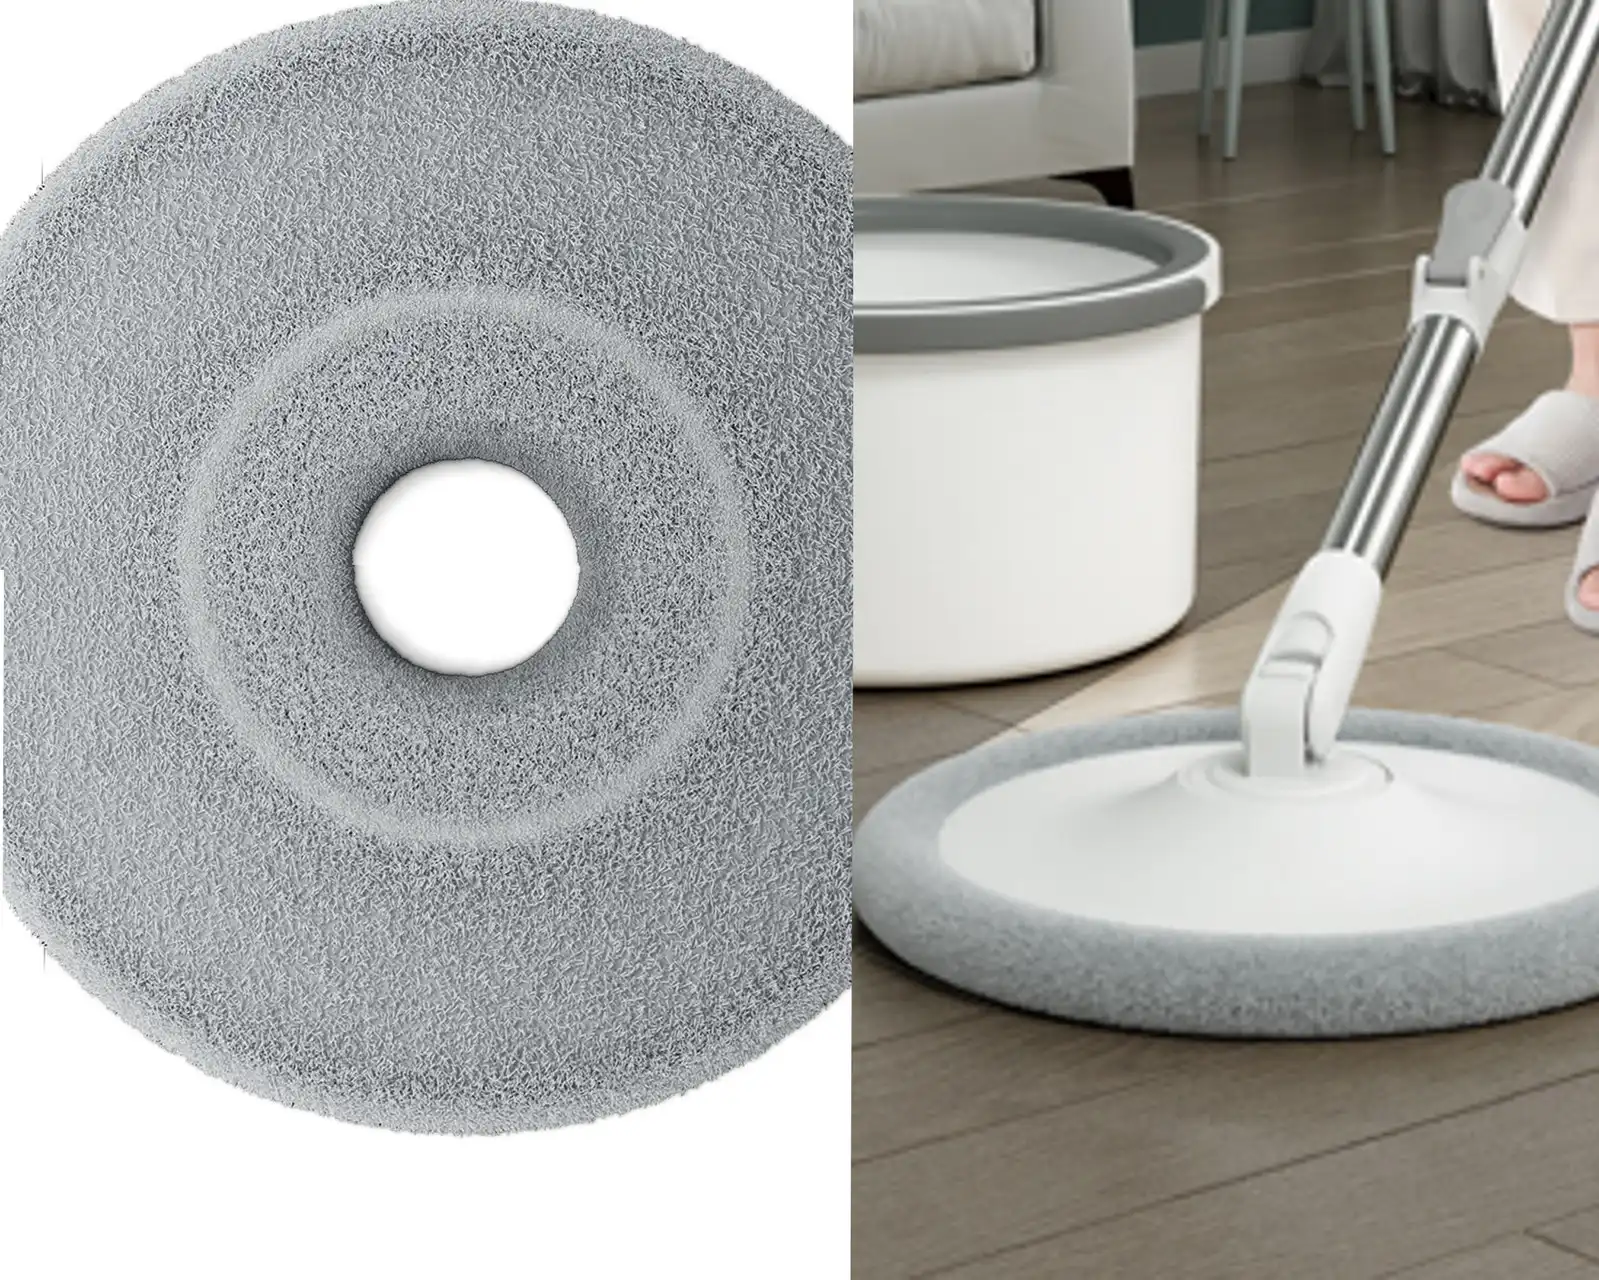 Microfibre Spin Mop Head Pad for Vividendo Spin Mop 2 MOP HEADS ONLY